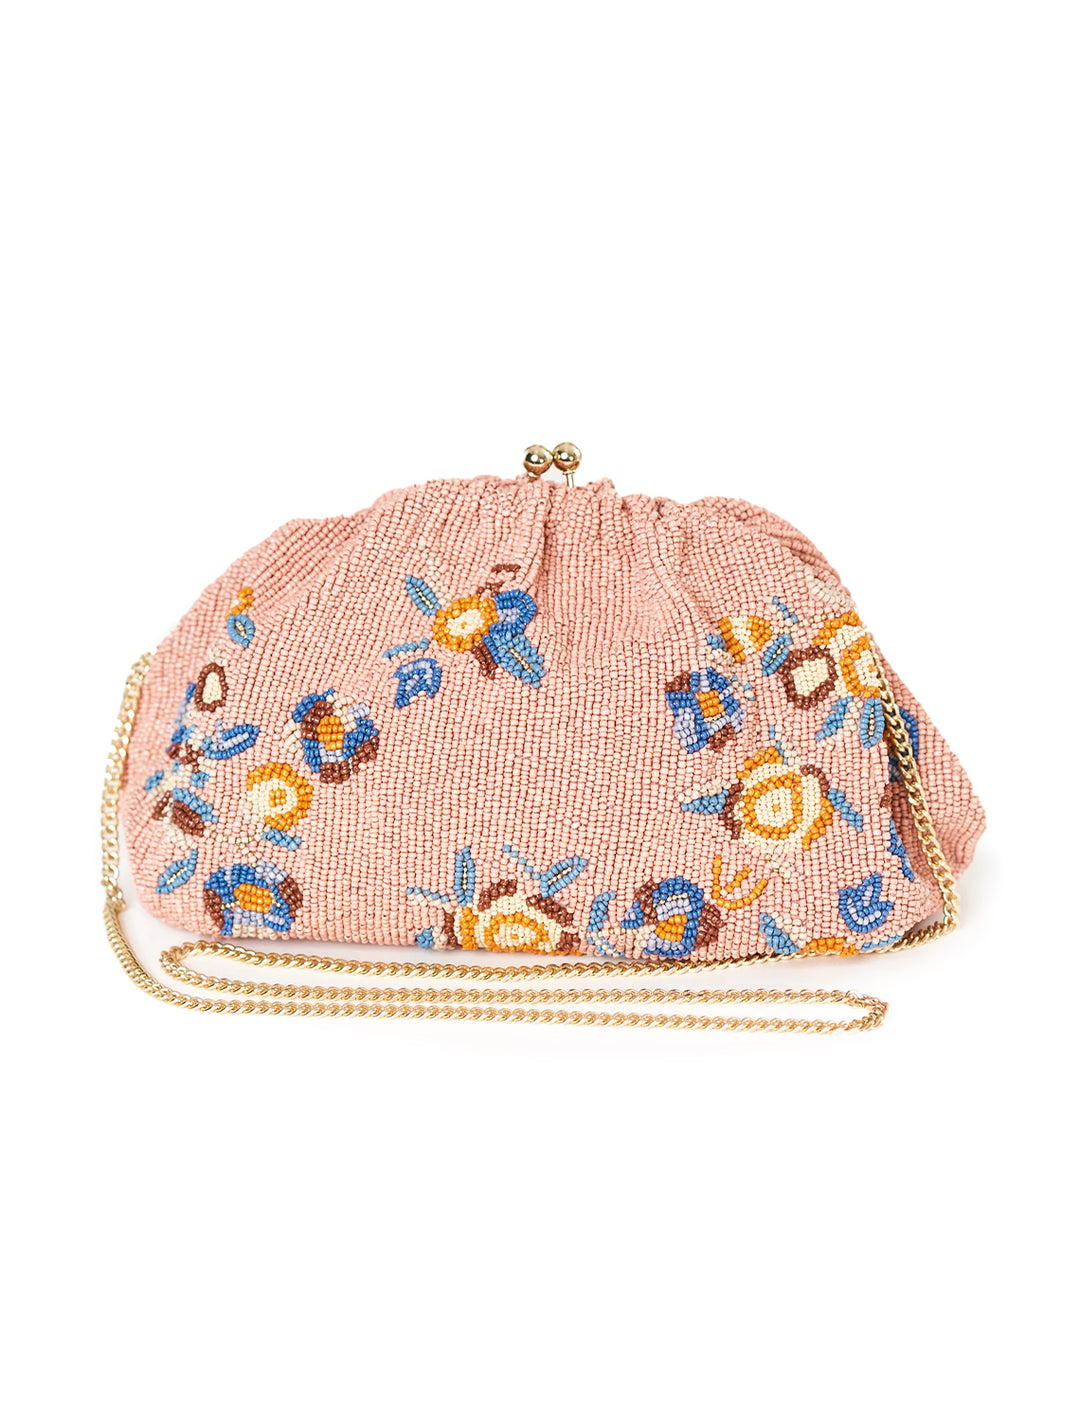 Front view of M.A.B.E.'s birdie beaded clutch in dusty pink.